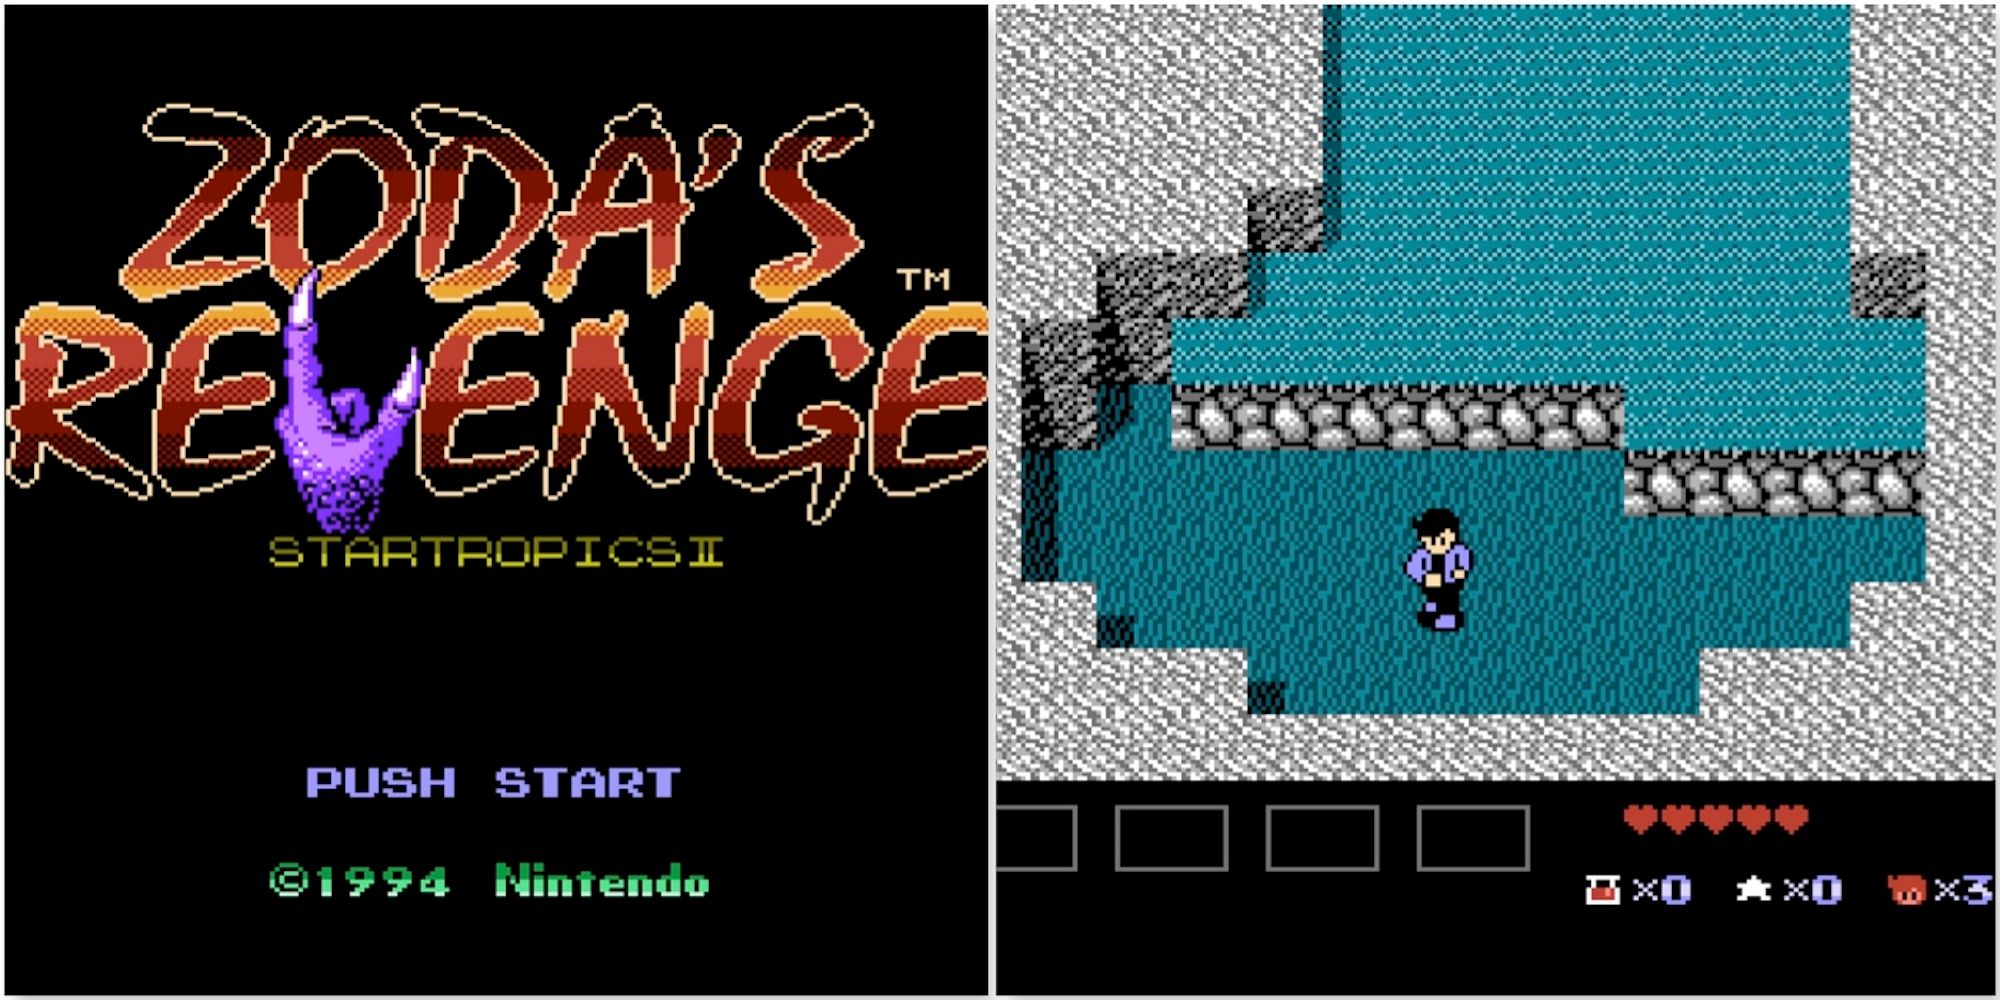 The title screen and exploring the world in StarTropics 2